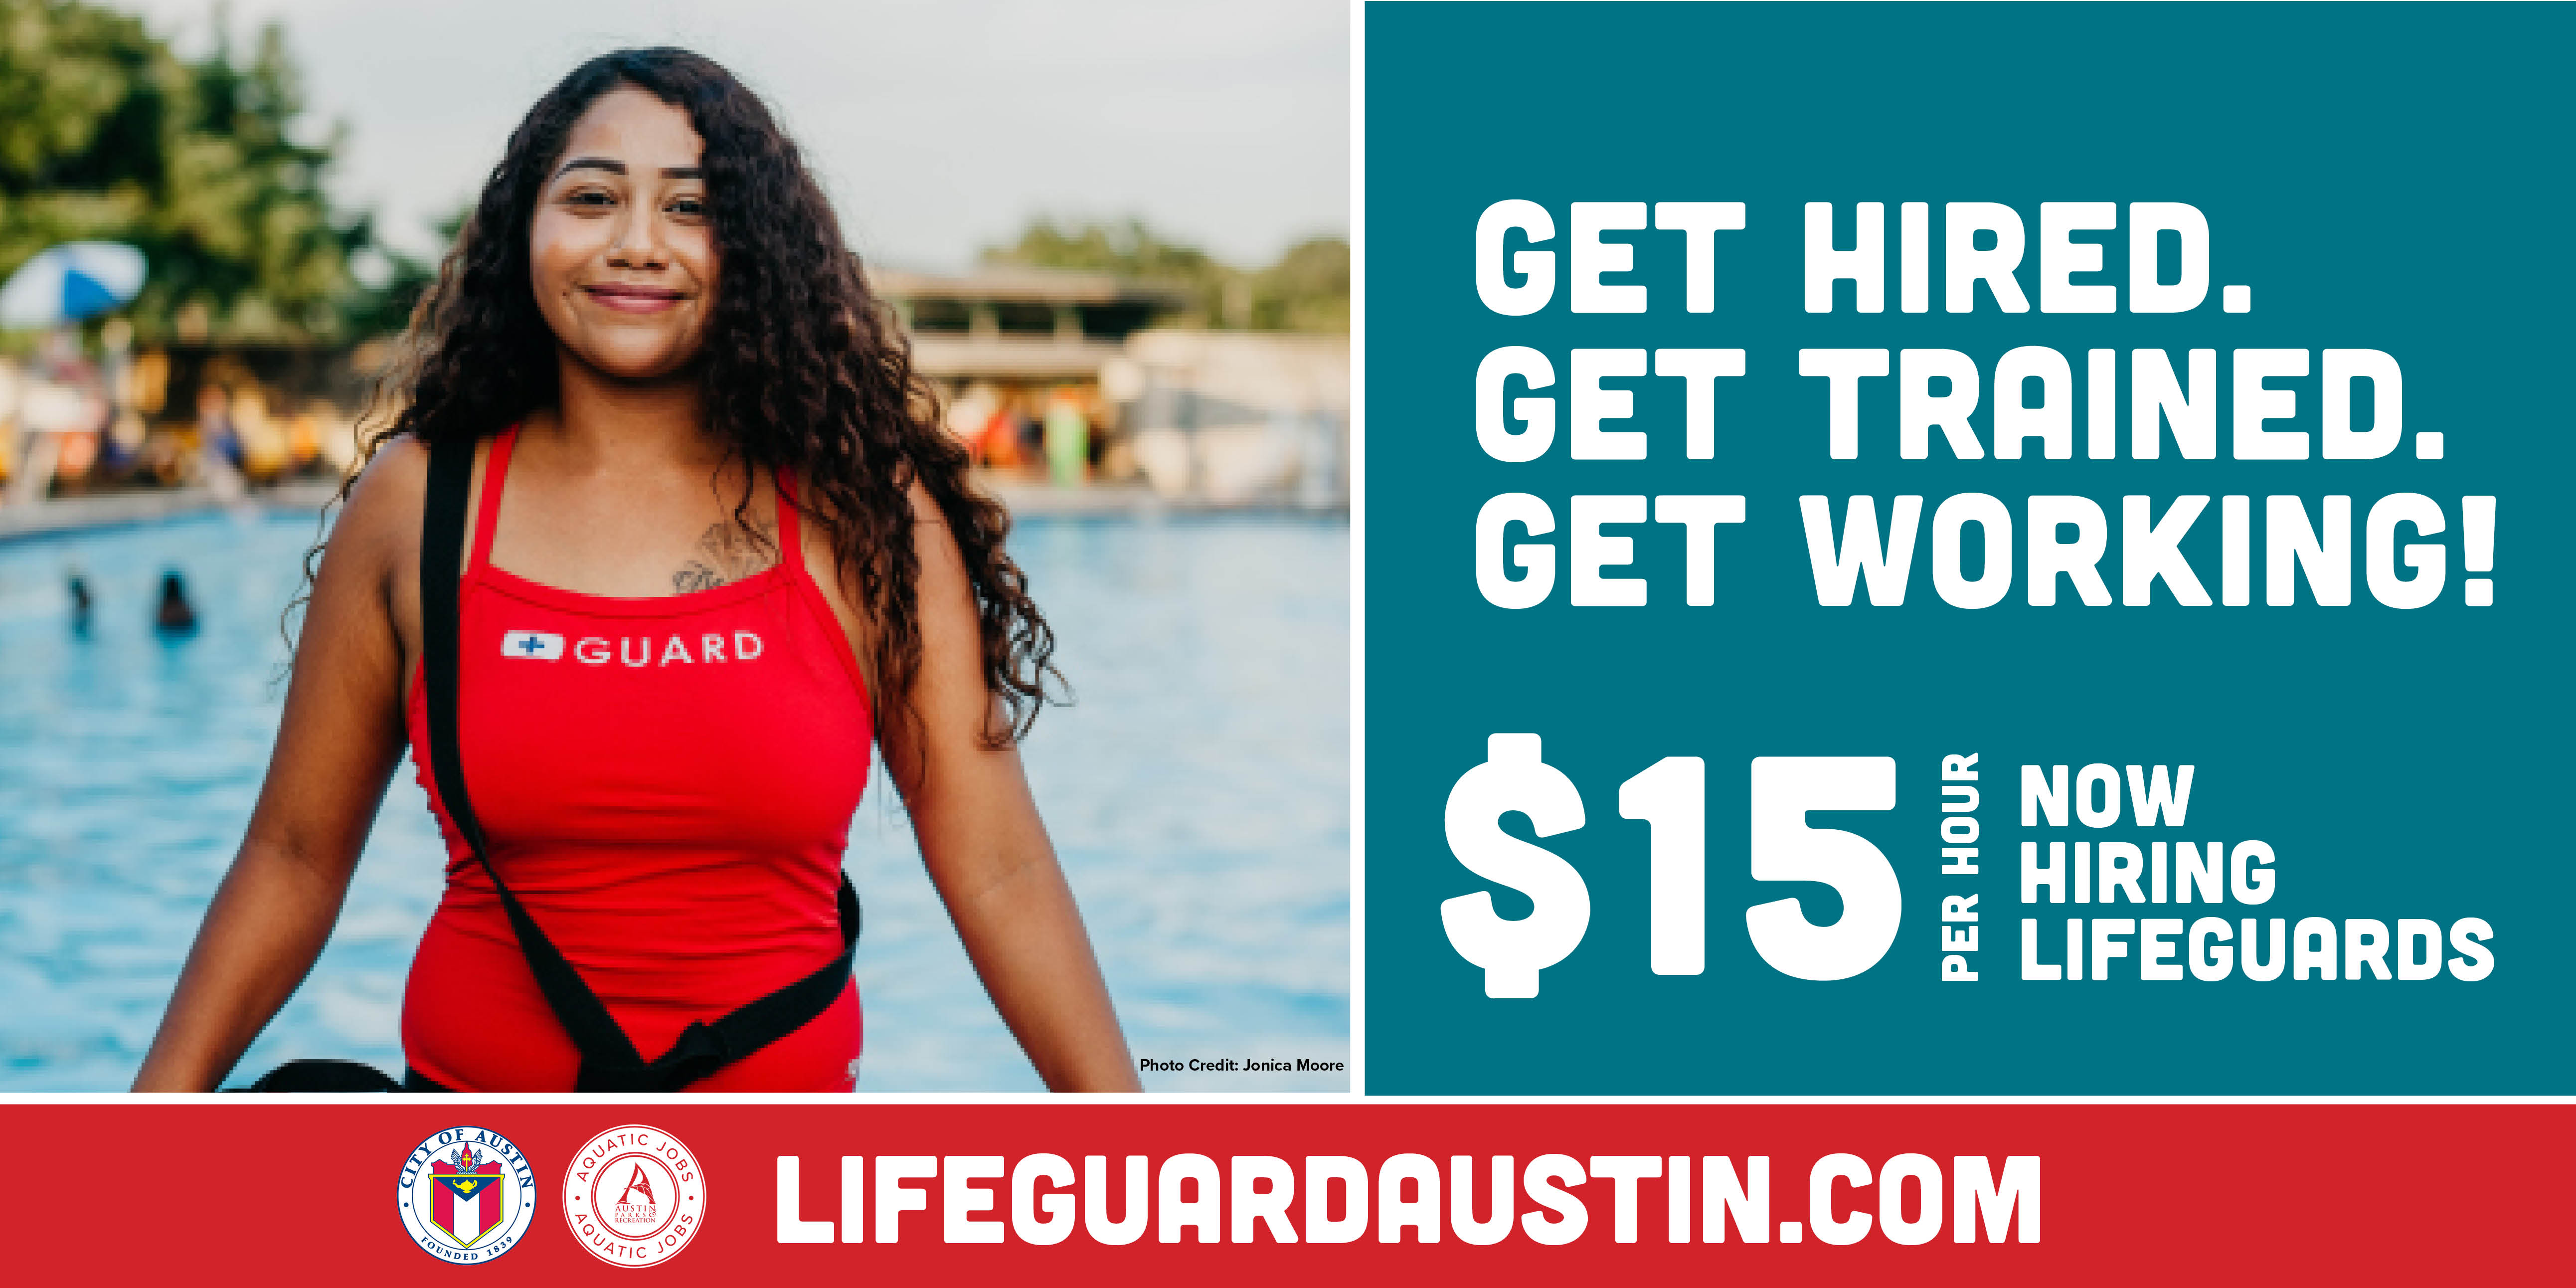 Lifeguard standing next to pool in uniform. Text says, get hired, get trained, get working. $15 per hour. Lifeguardaustin.com